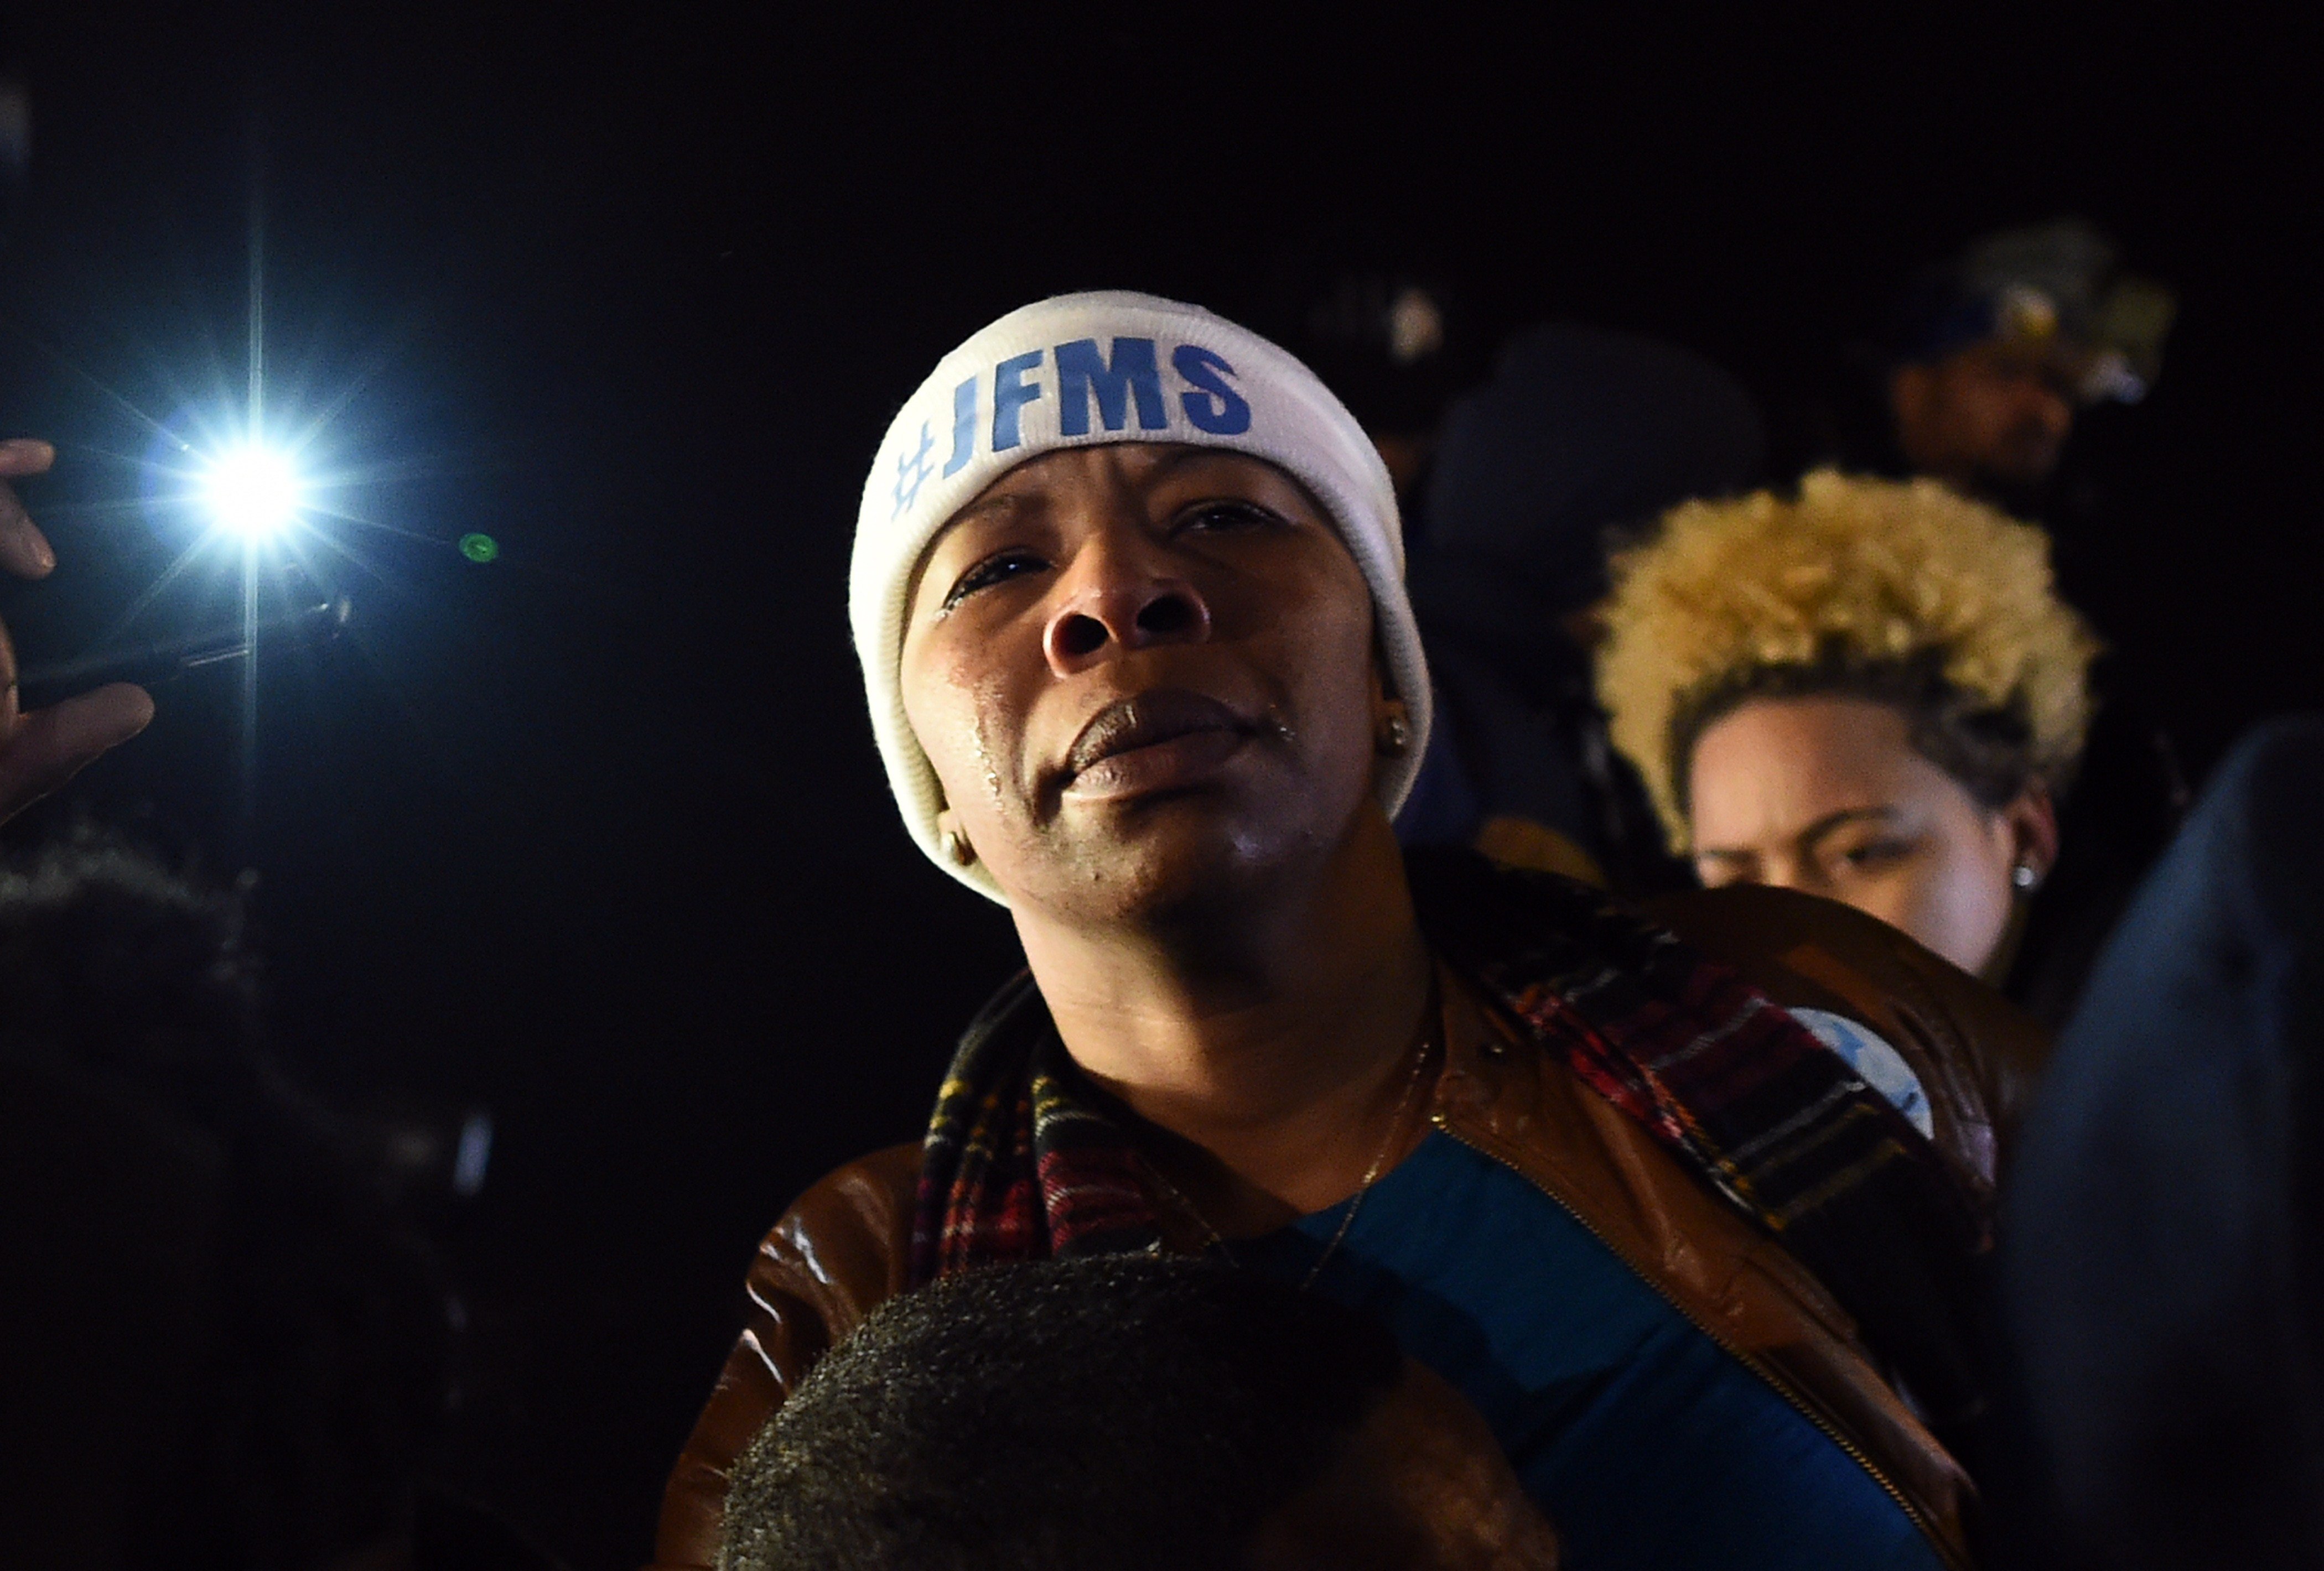 Michael Brown's mother Lesley McSpadden cries outside the police station in Ferguson, Mo. on Nov. 24, 2014 after hearing the grand jury decision on her son's fatal shooting. (Jewel Samad—AFP/Getty Images)